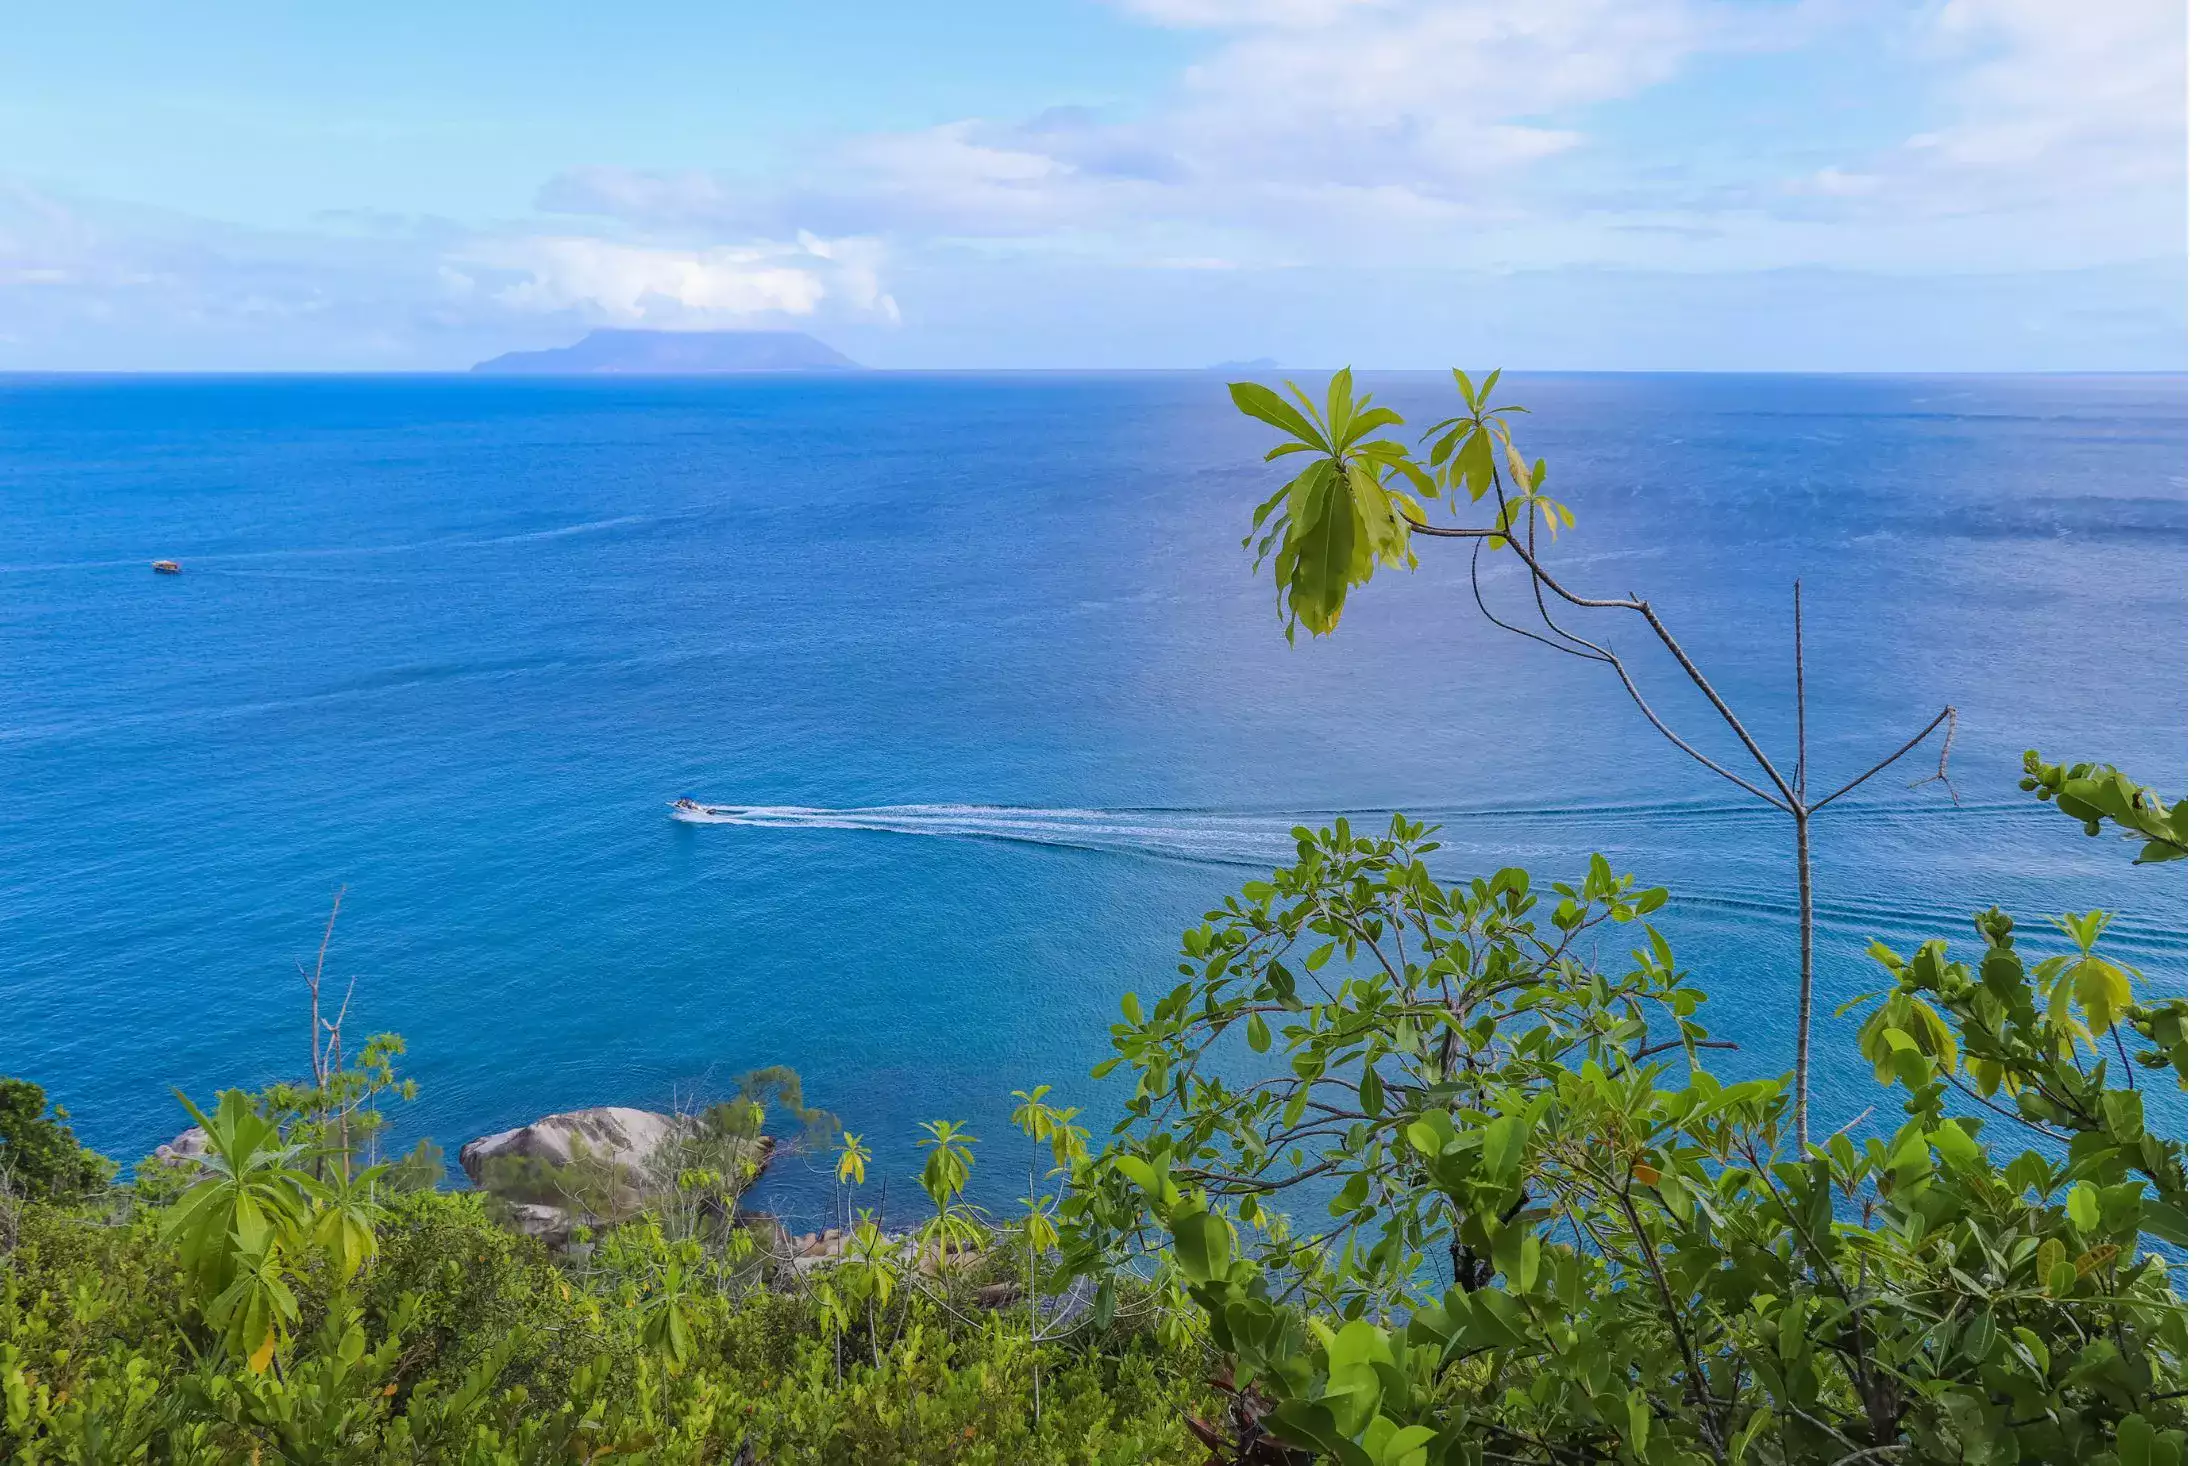 View from atop Silhouette Island in Seychelles.